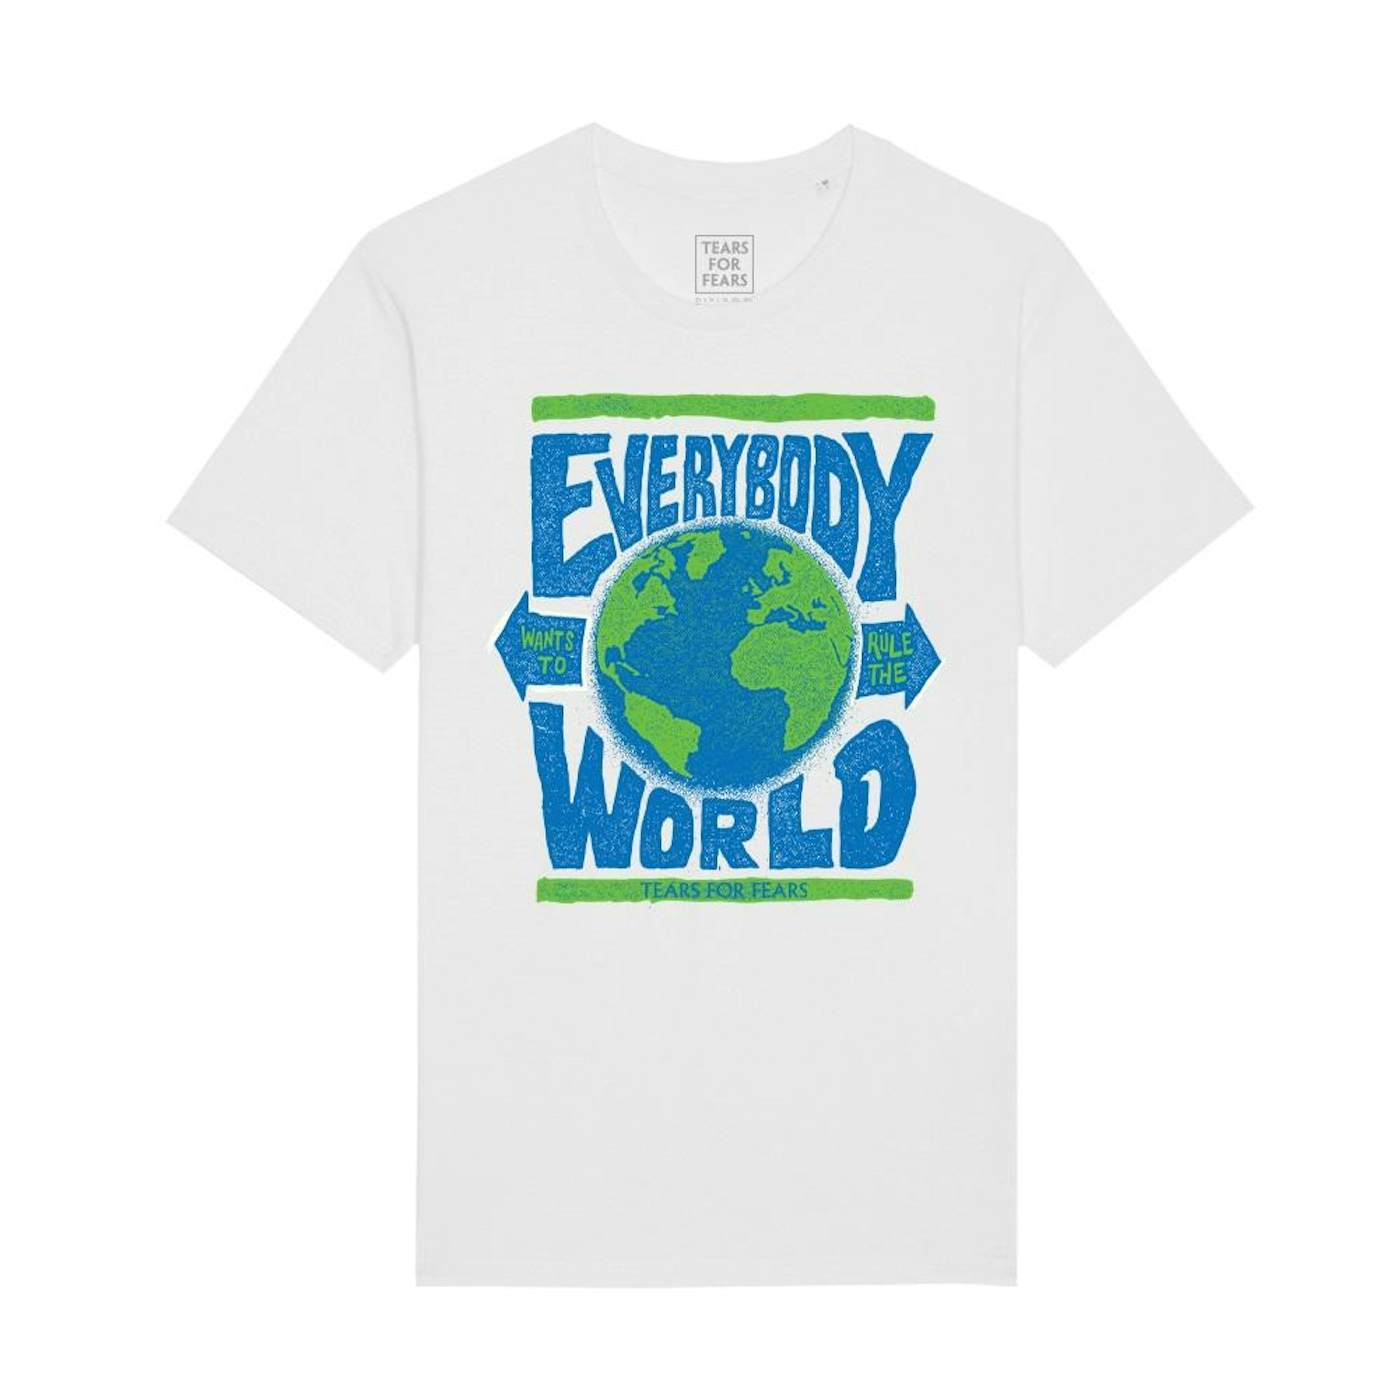 Tears for Fears Everybody Wants to Rule the World Shirt for 